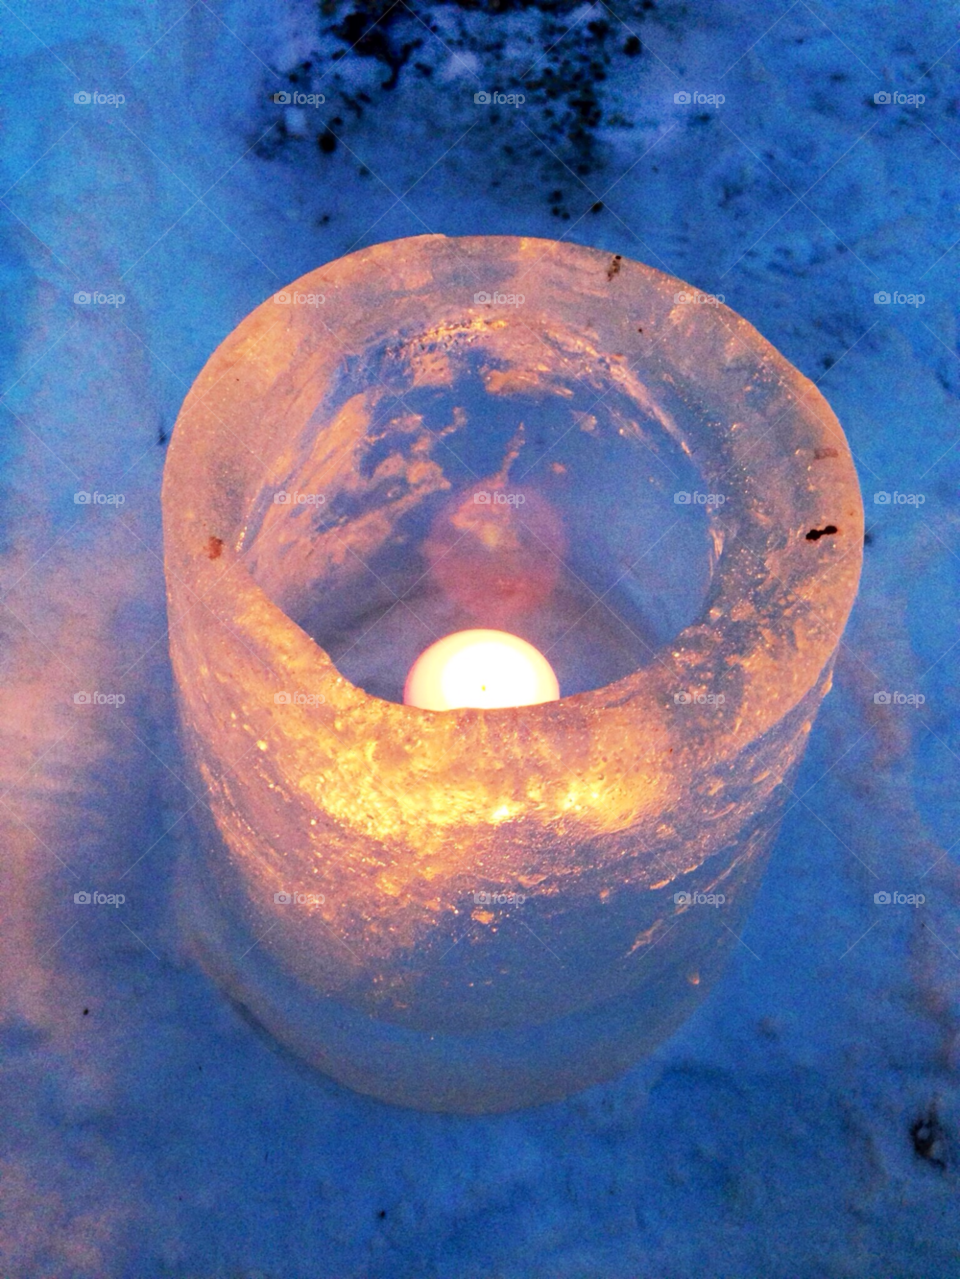 stockholm ice lamp flame evening night winter beautiful snow lgt41 by lgt41